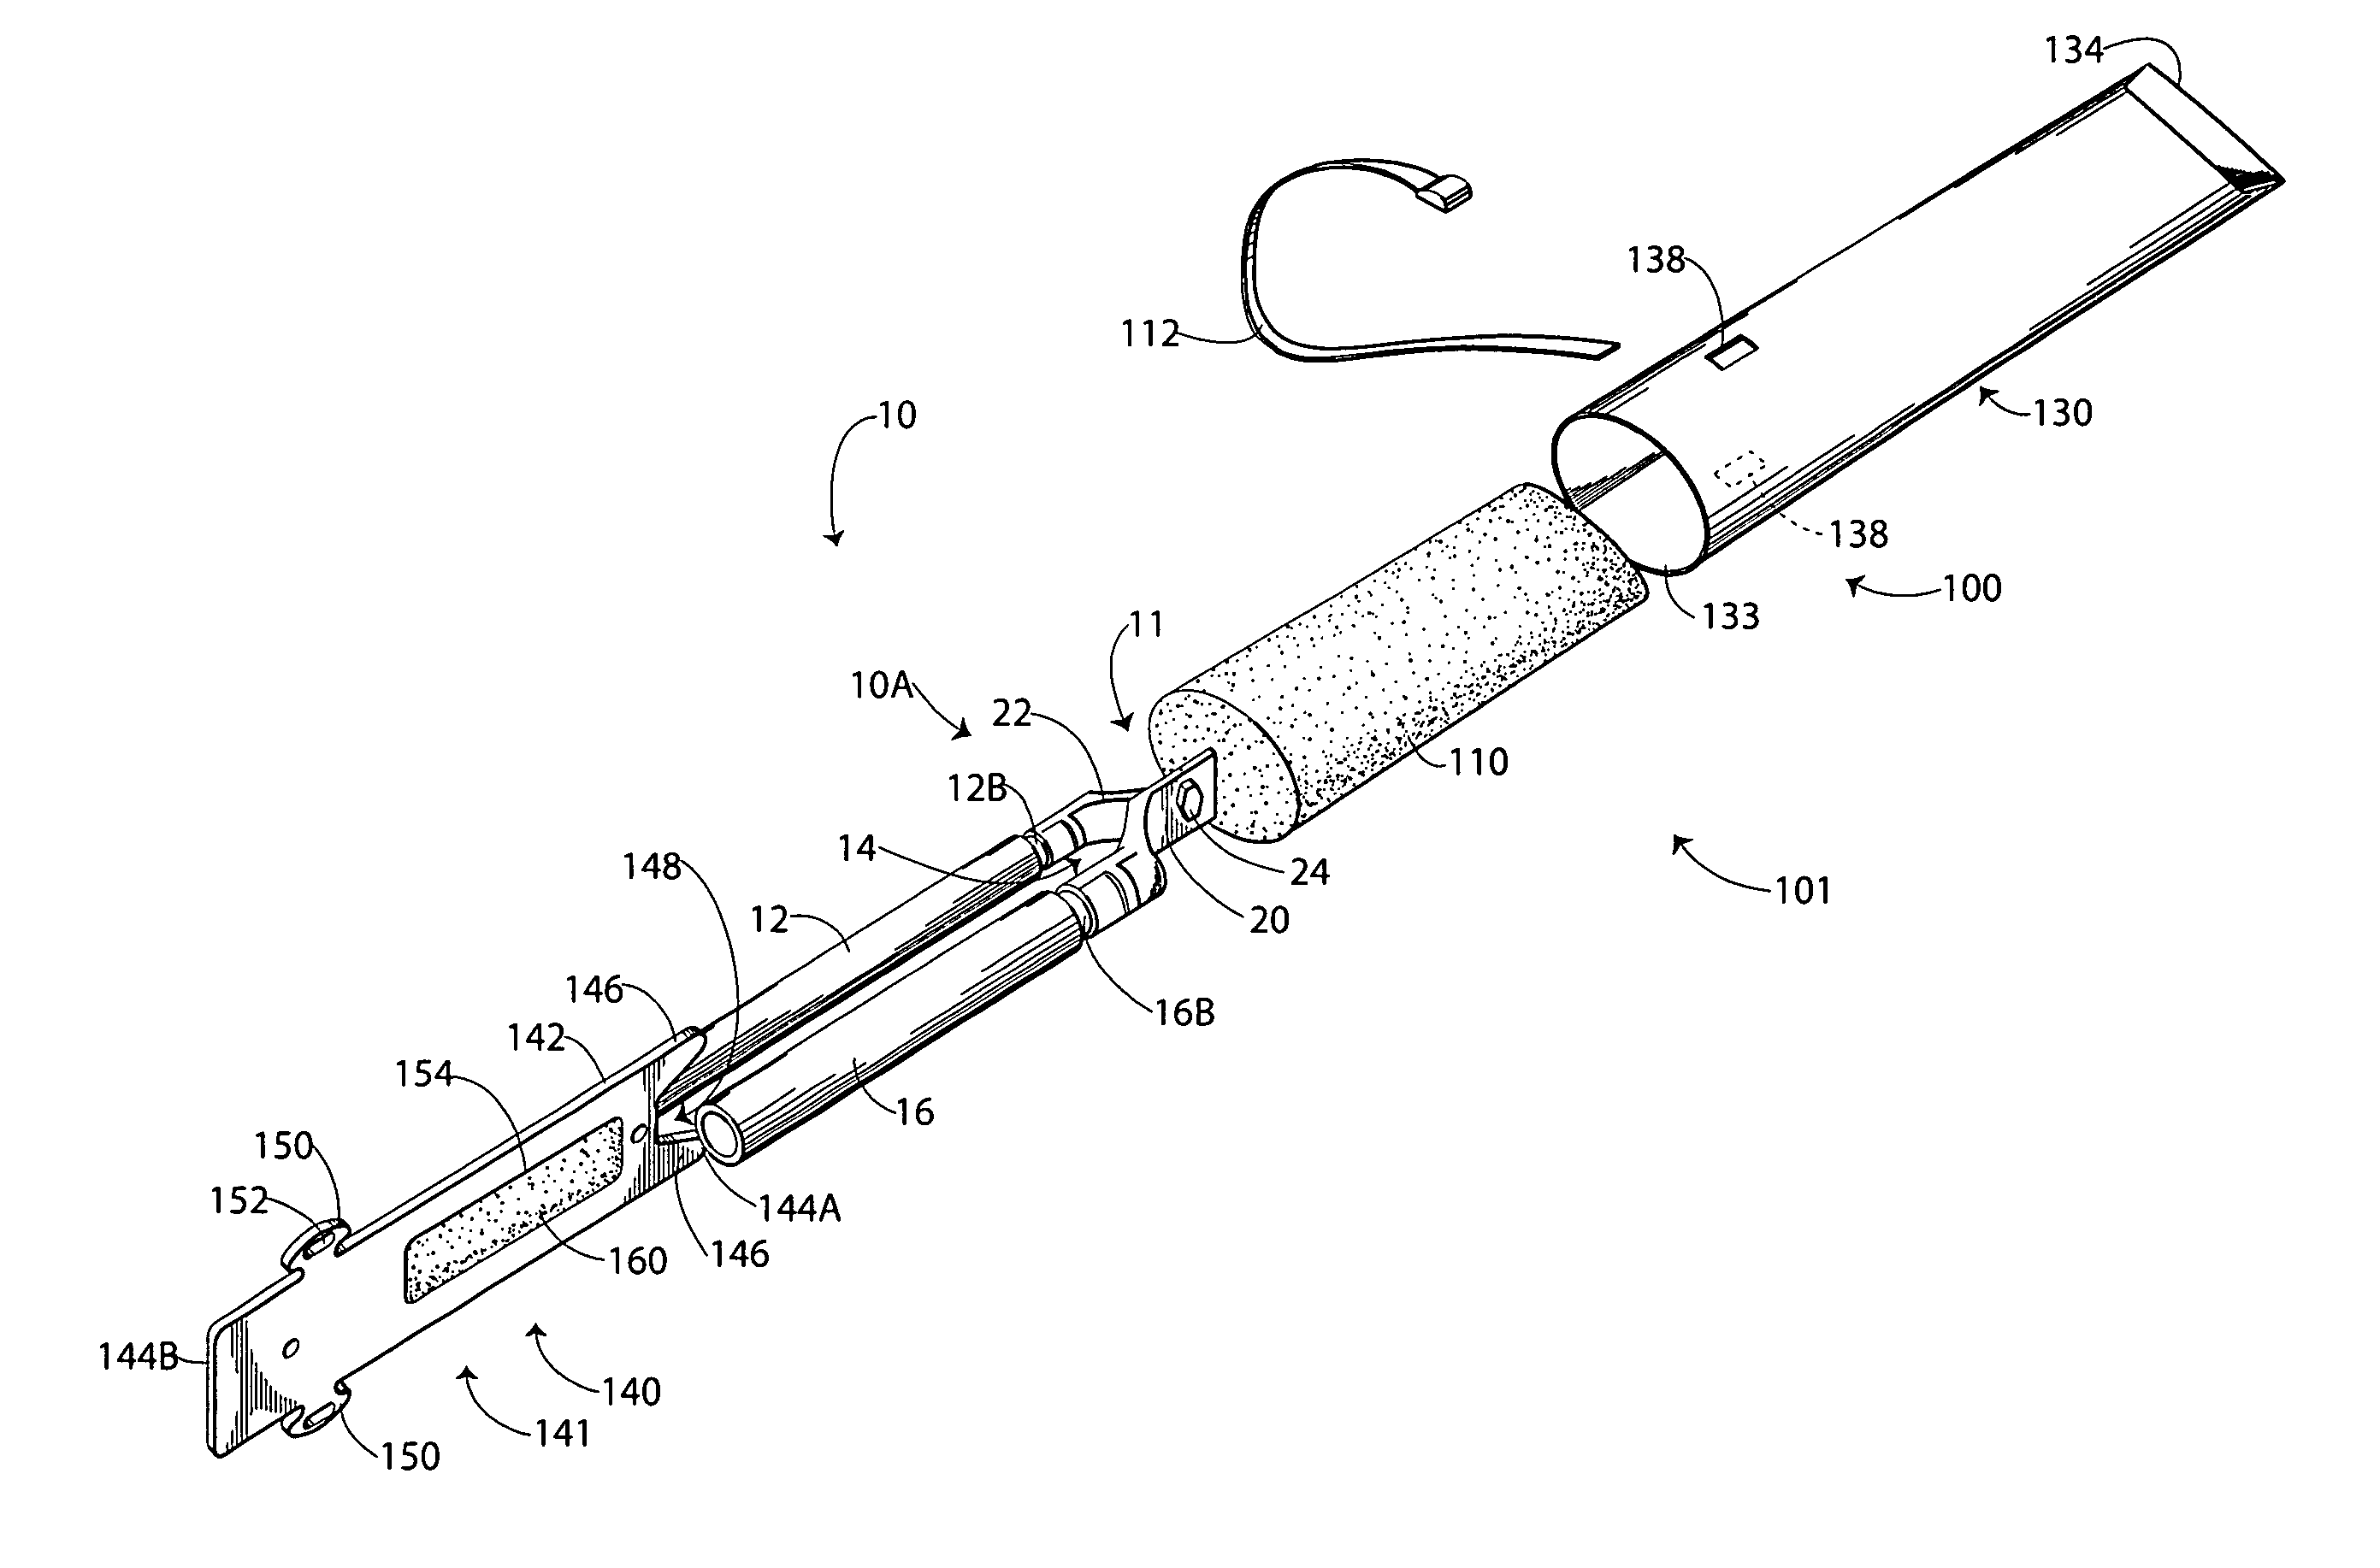 Electrical connection protector kits, insert assemblies and methods for using the same